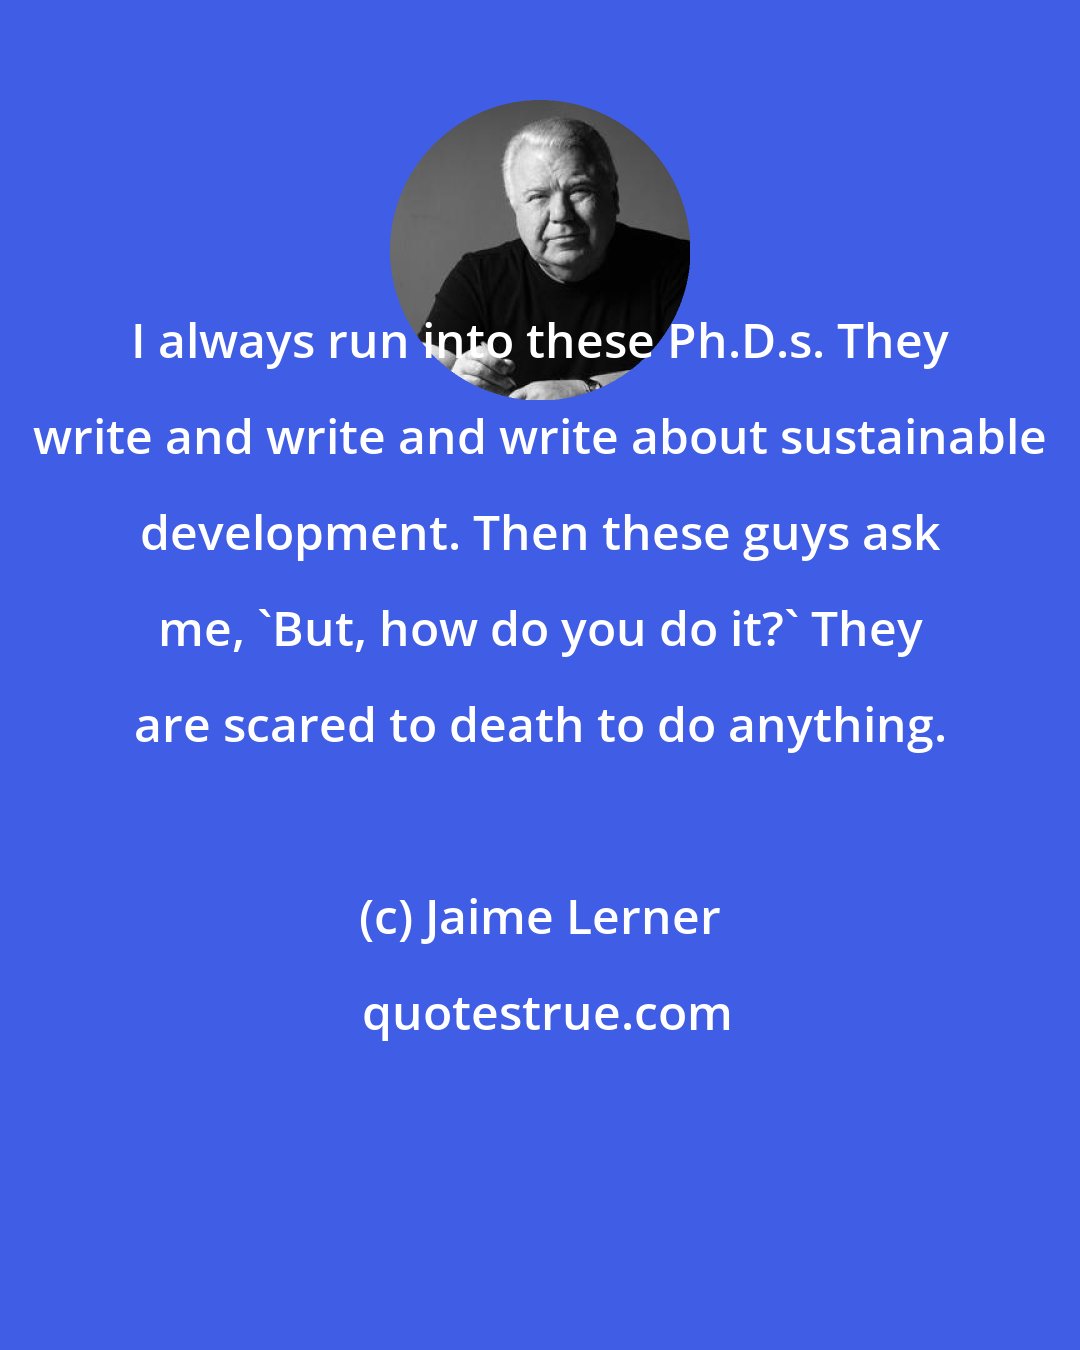 Jaime Lerner: I always run into these Ph.D.s. They write and write and write about sustainable development. Then these guys ask me, 'But, how do you do it?' They are scared to death to do anything.